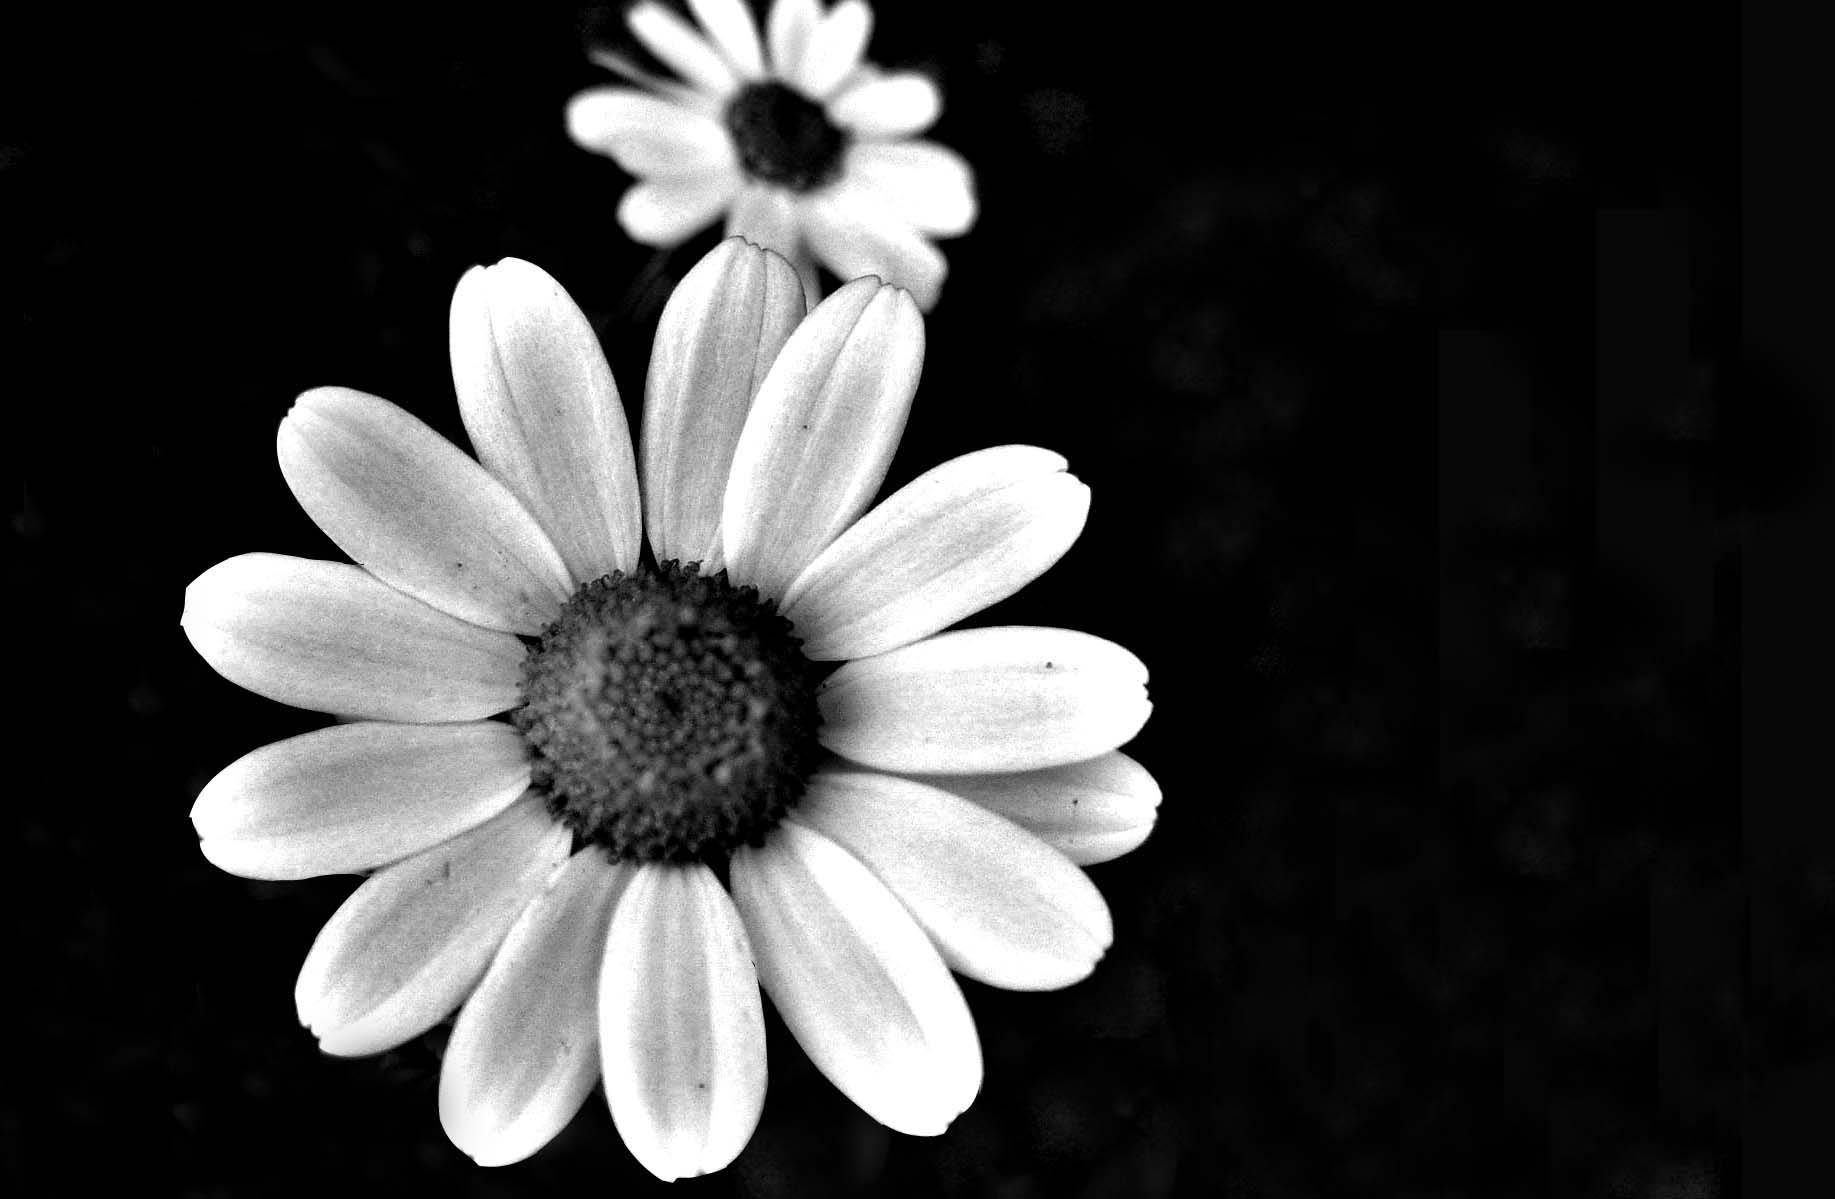 black and white flower images Download